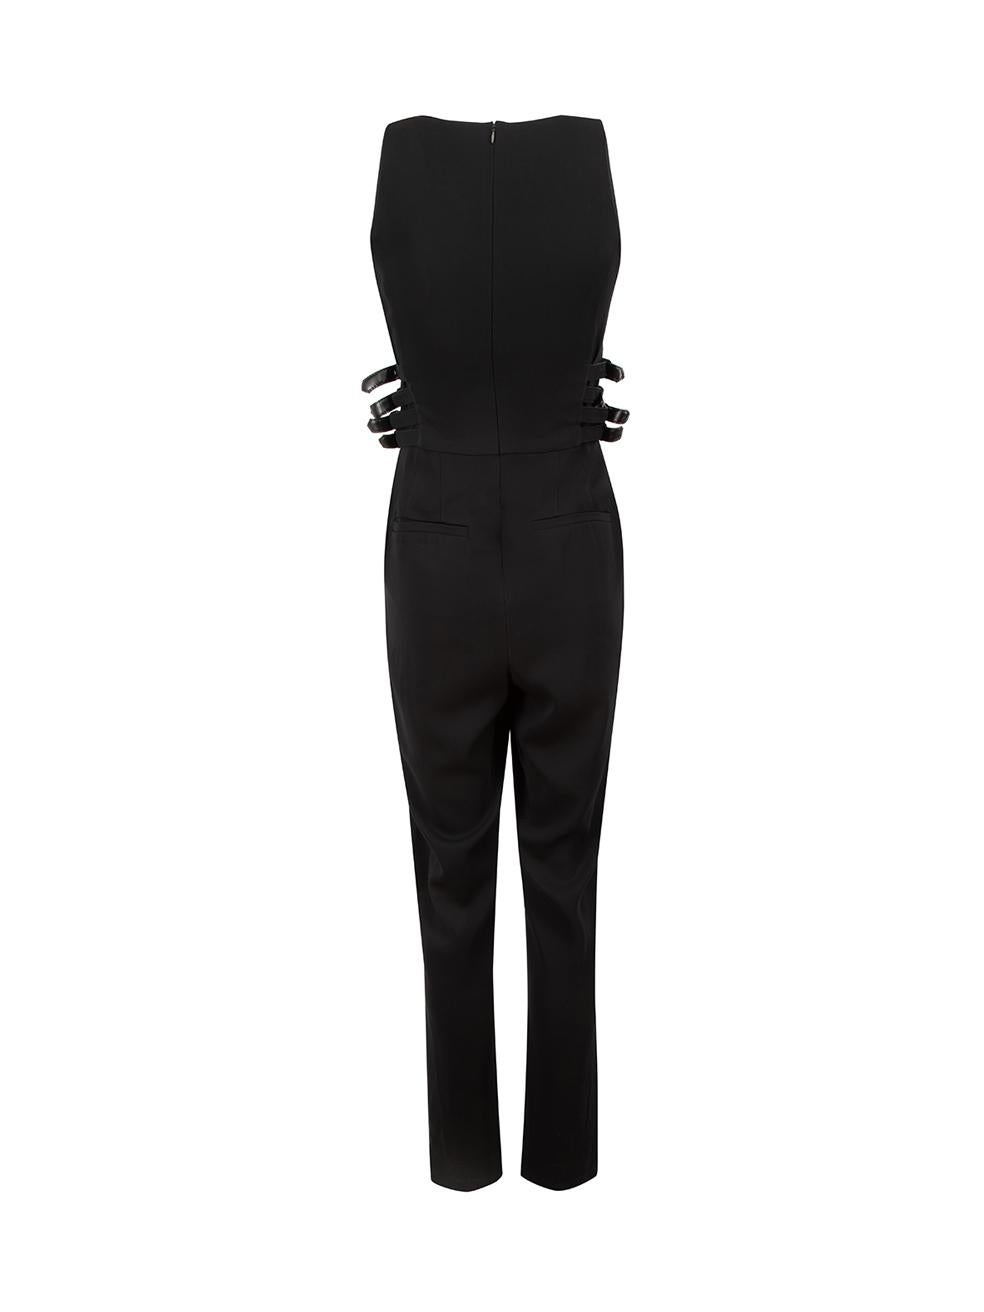 A.L.C Black Buckle Straps Detail Sleeveless Jumpsuit Size M In Good Condition For Sale In London, GB